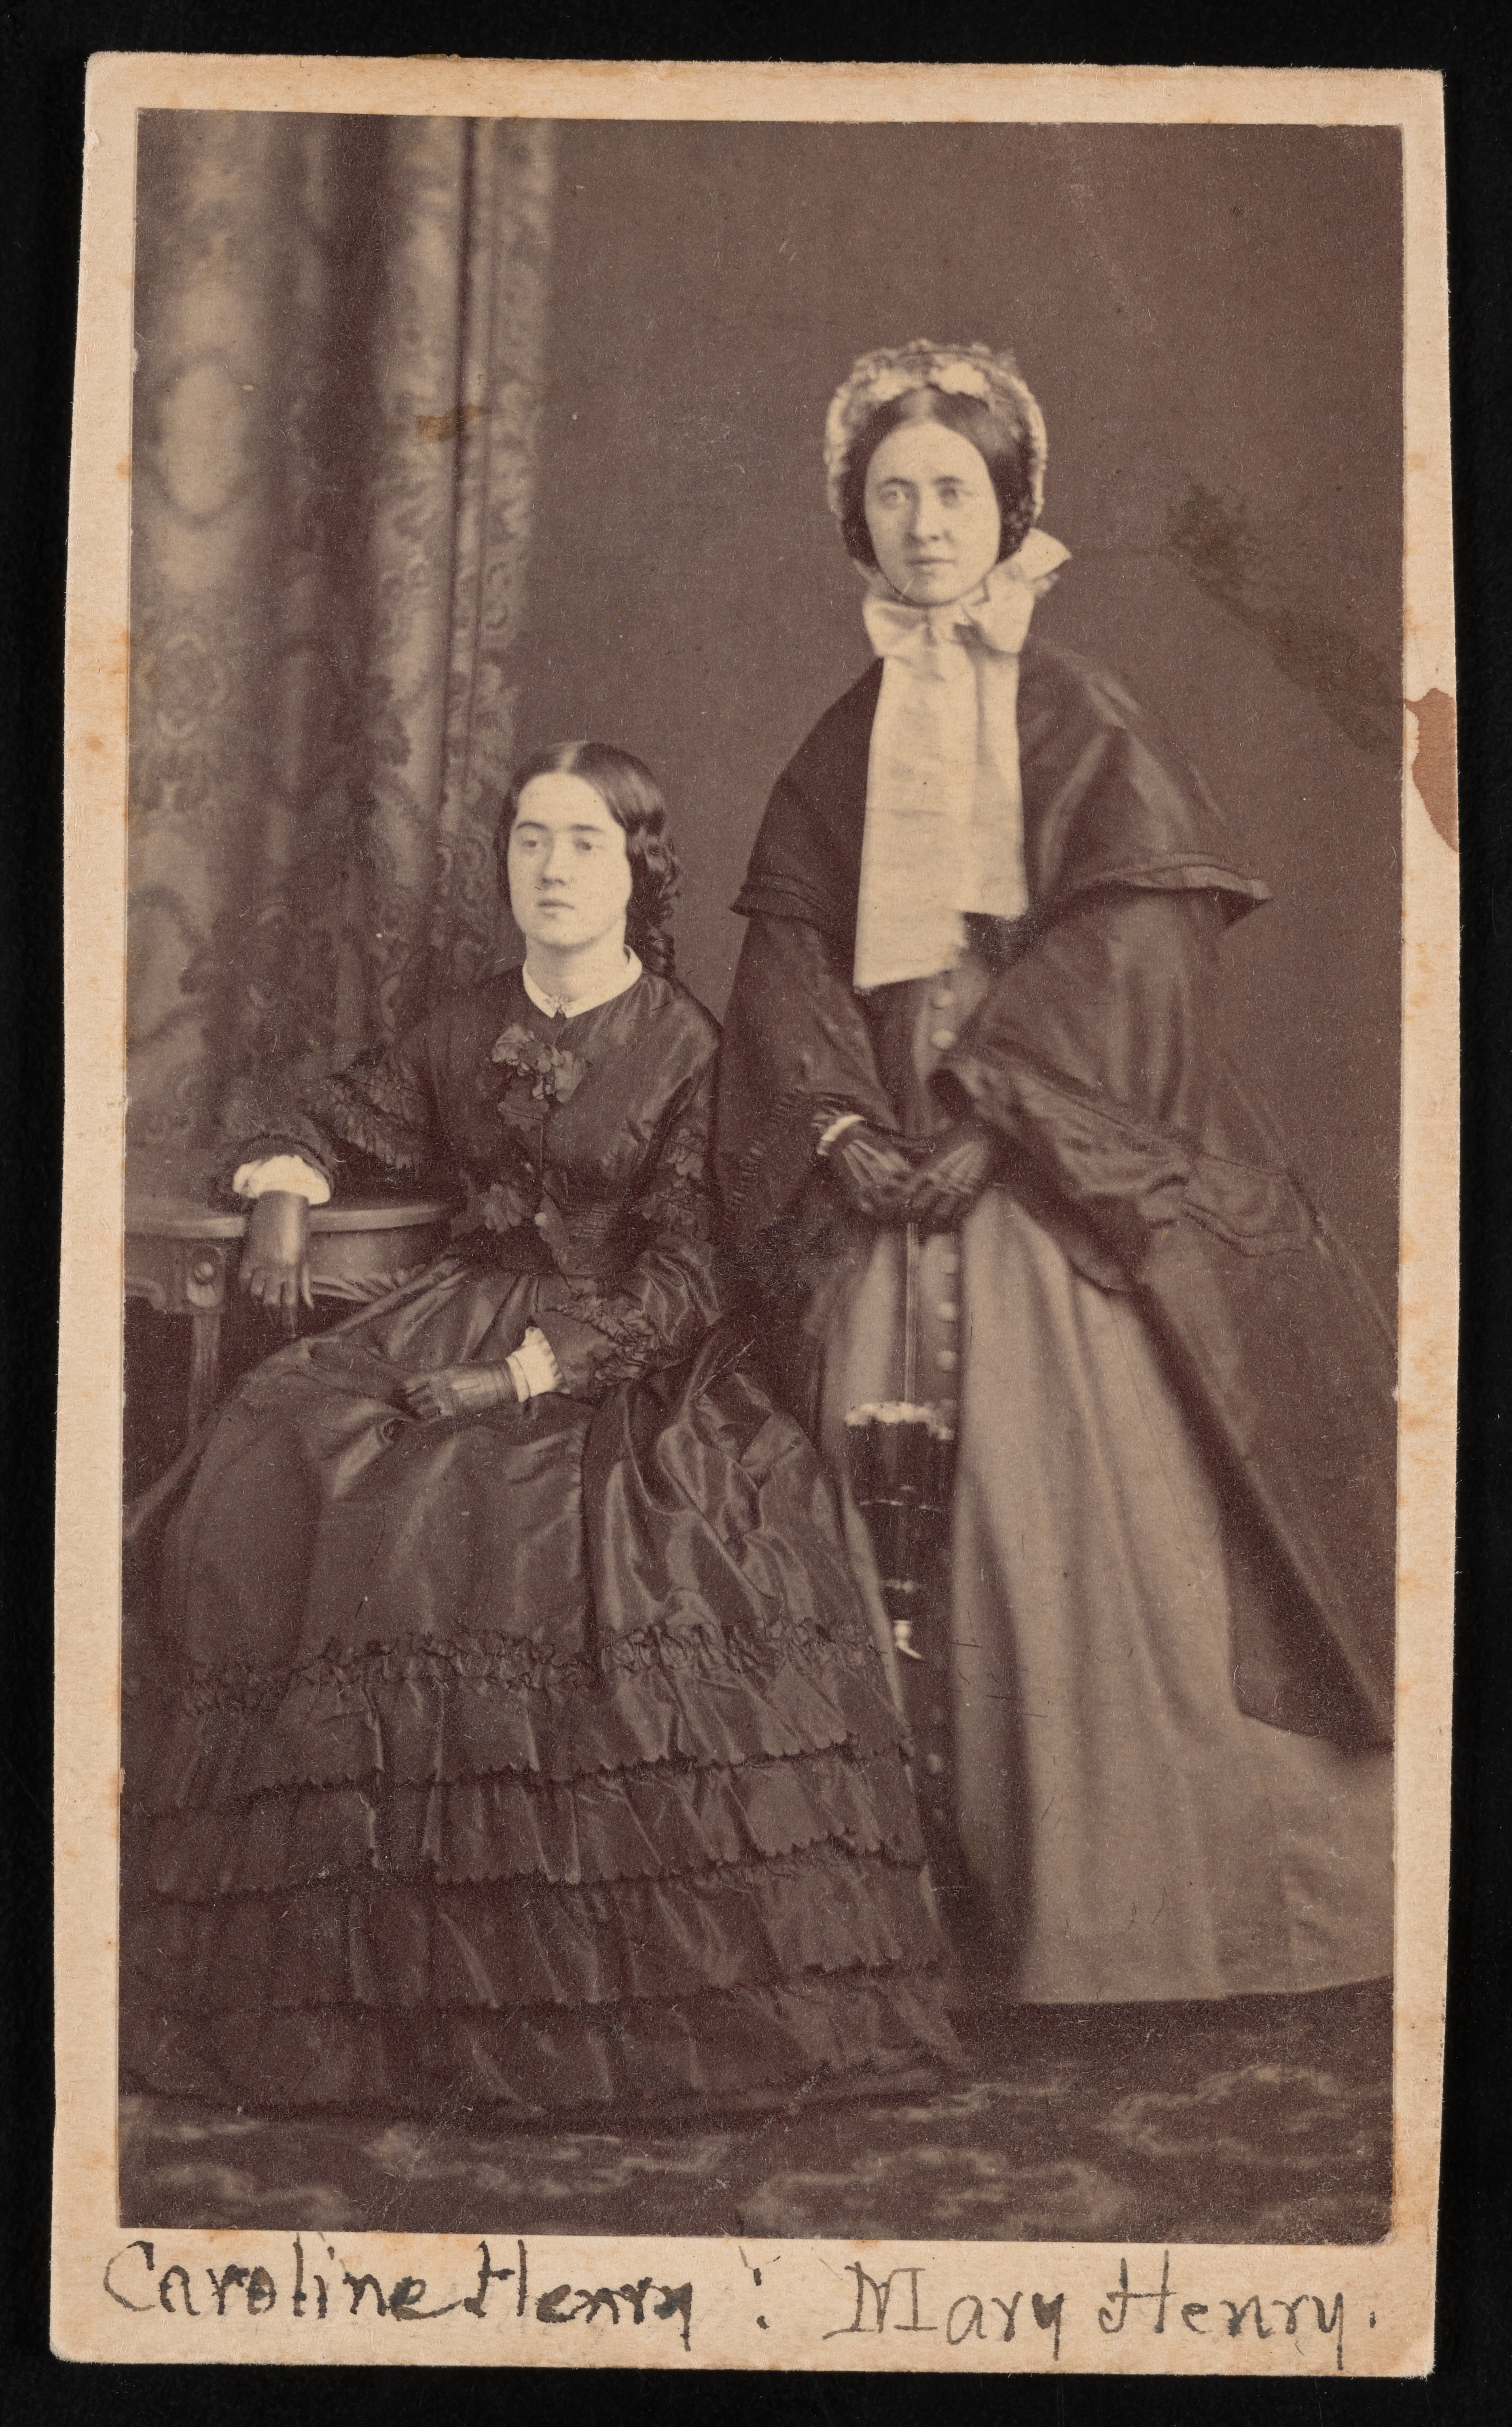 Caroline Henry is seated and Mary Henry stands behind her. Both women are wearing long dresses and not looking directly at the camera. 